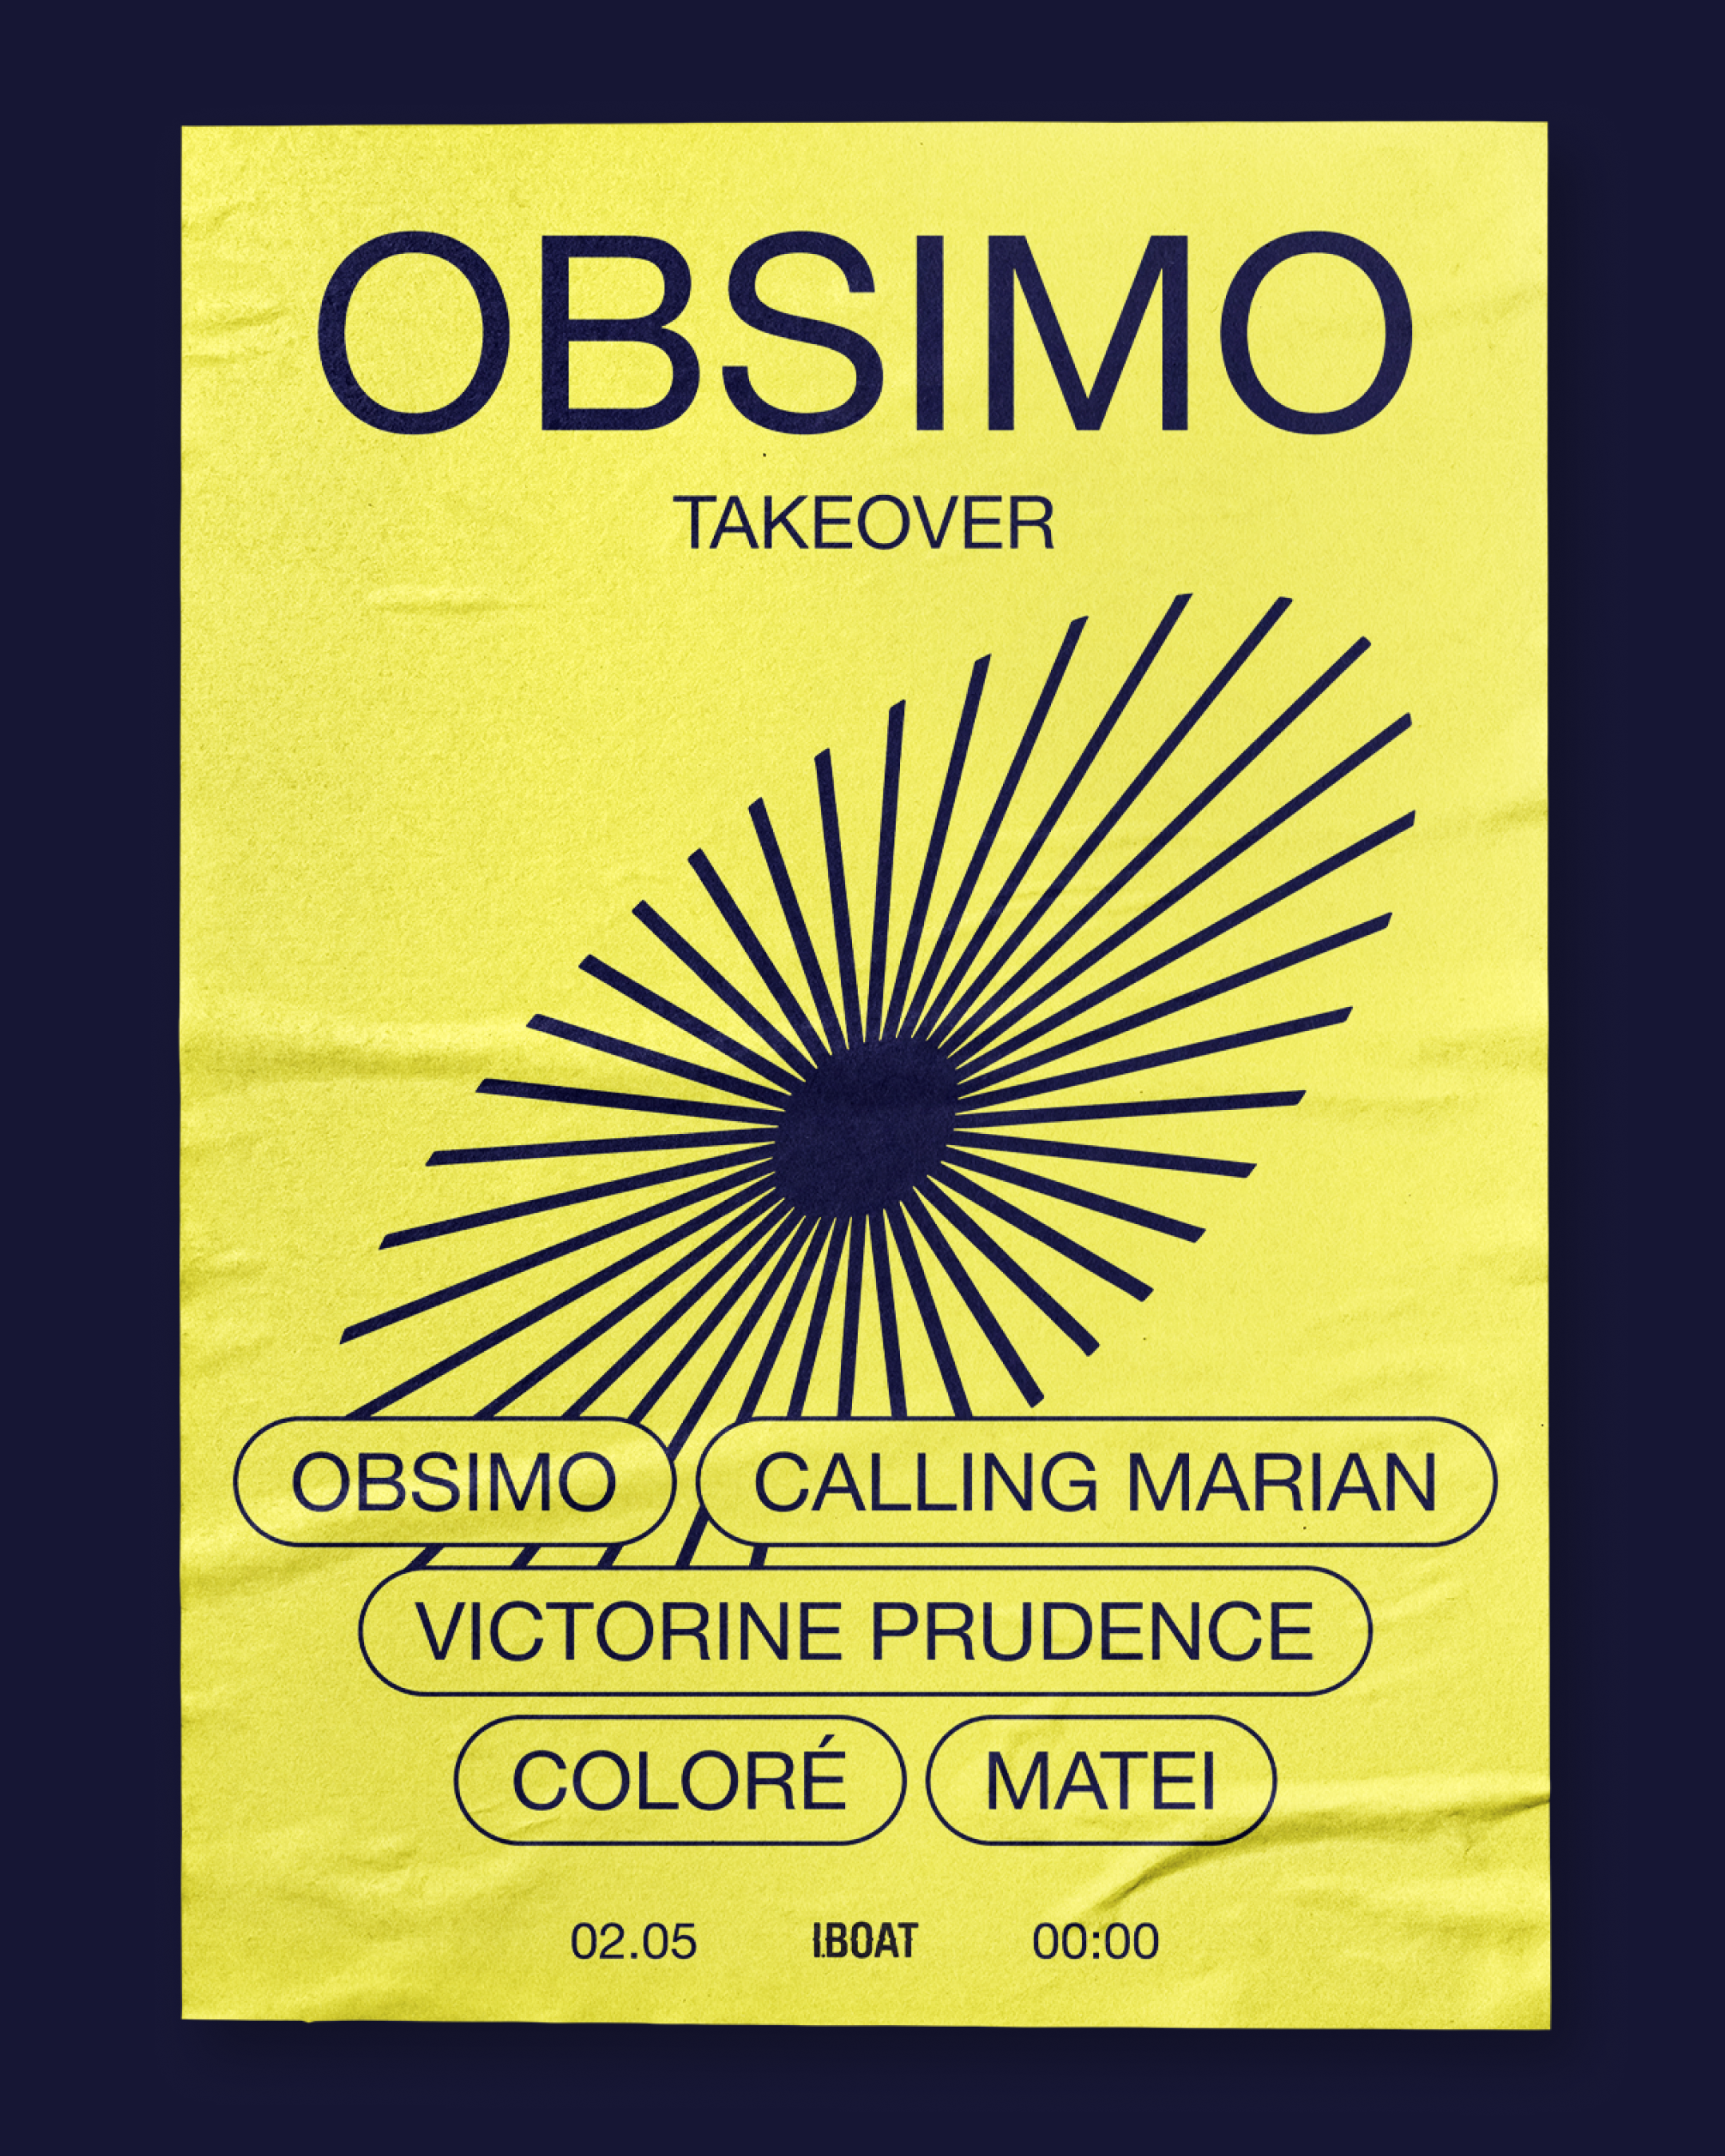 OBSIMO takeover x Calling Marian • COLORÉ • Matei • Victorine Prudence - Página frontal